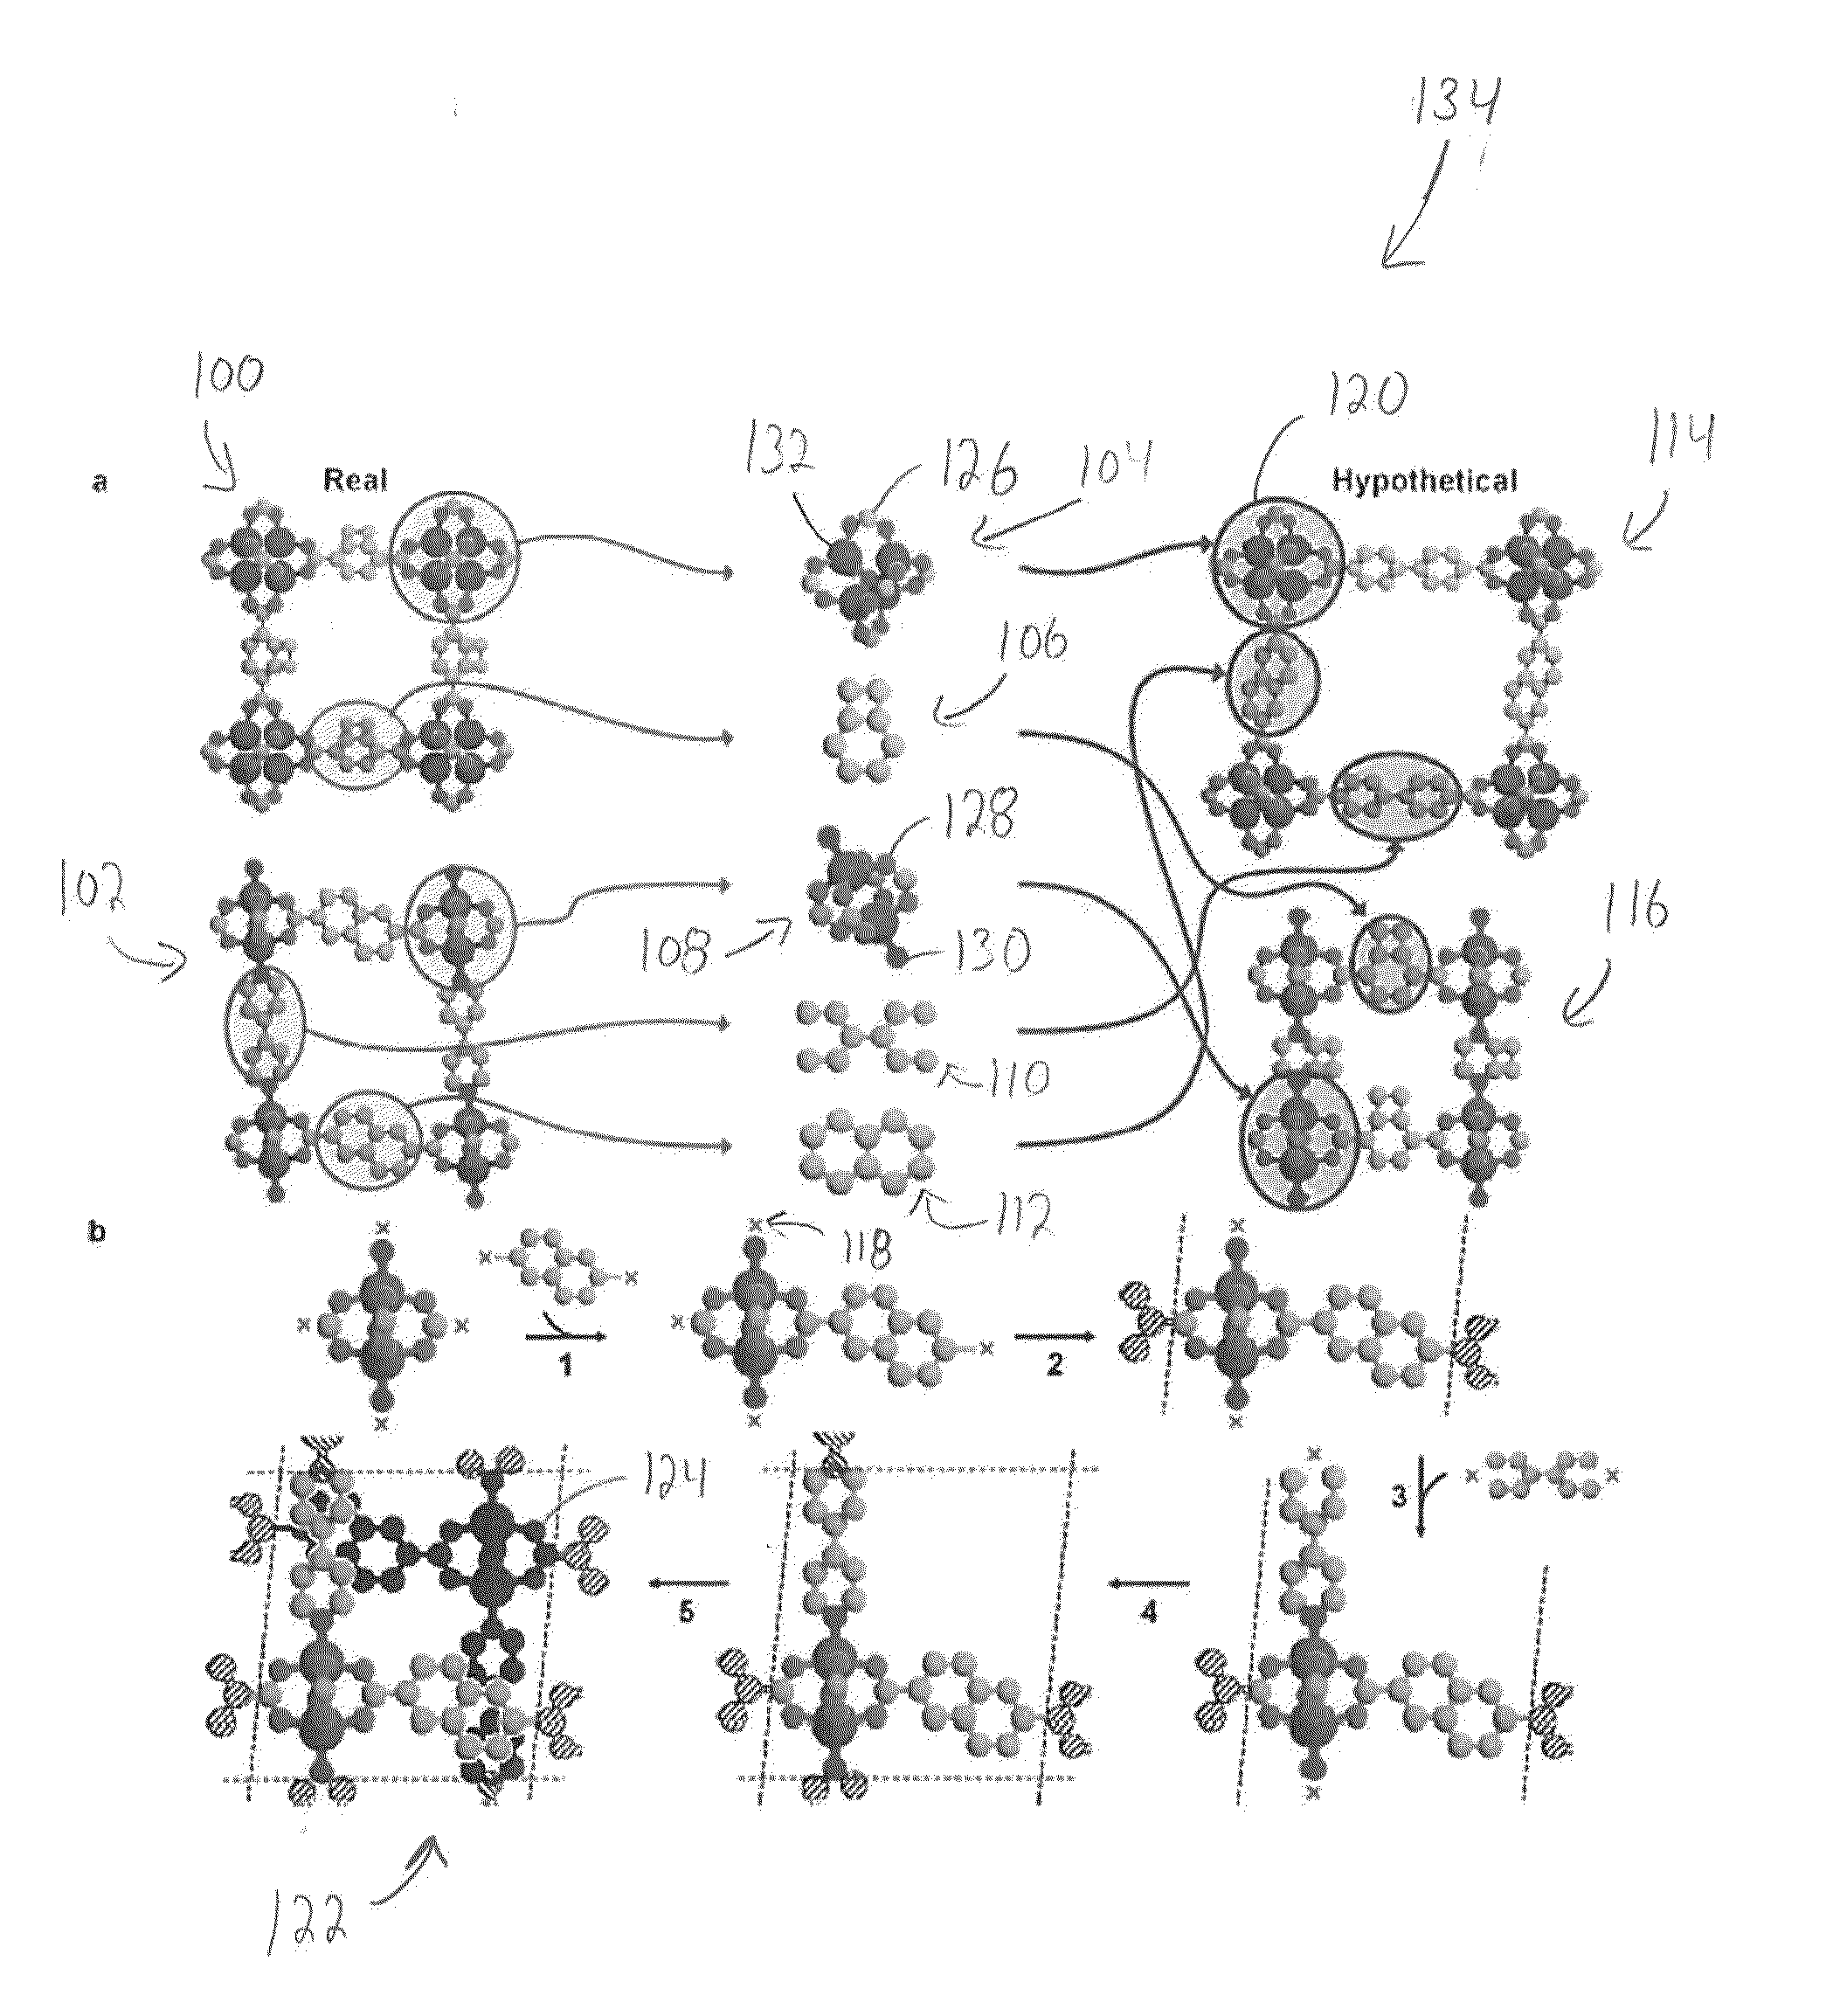 System and method for generating and/or screening potential metal-organic frameworks